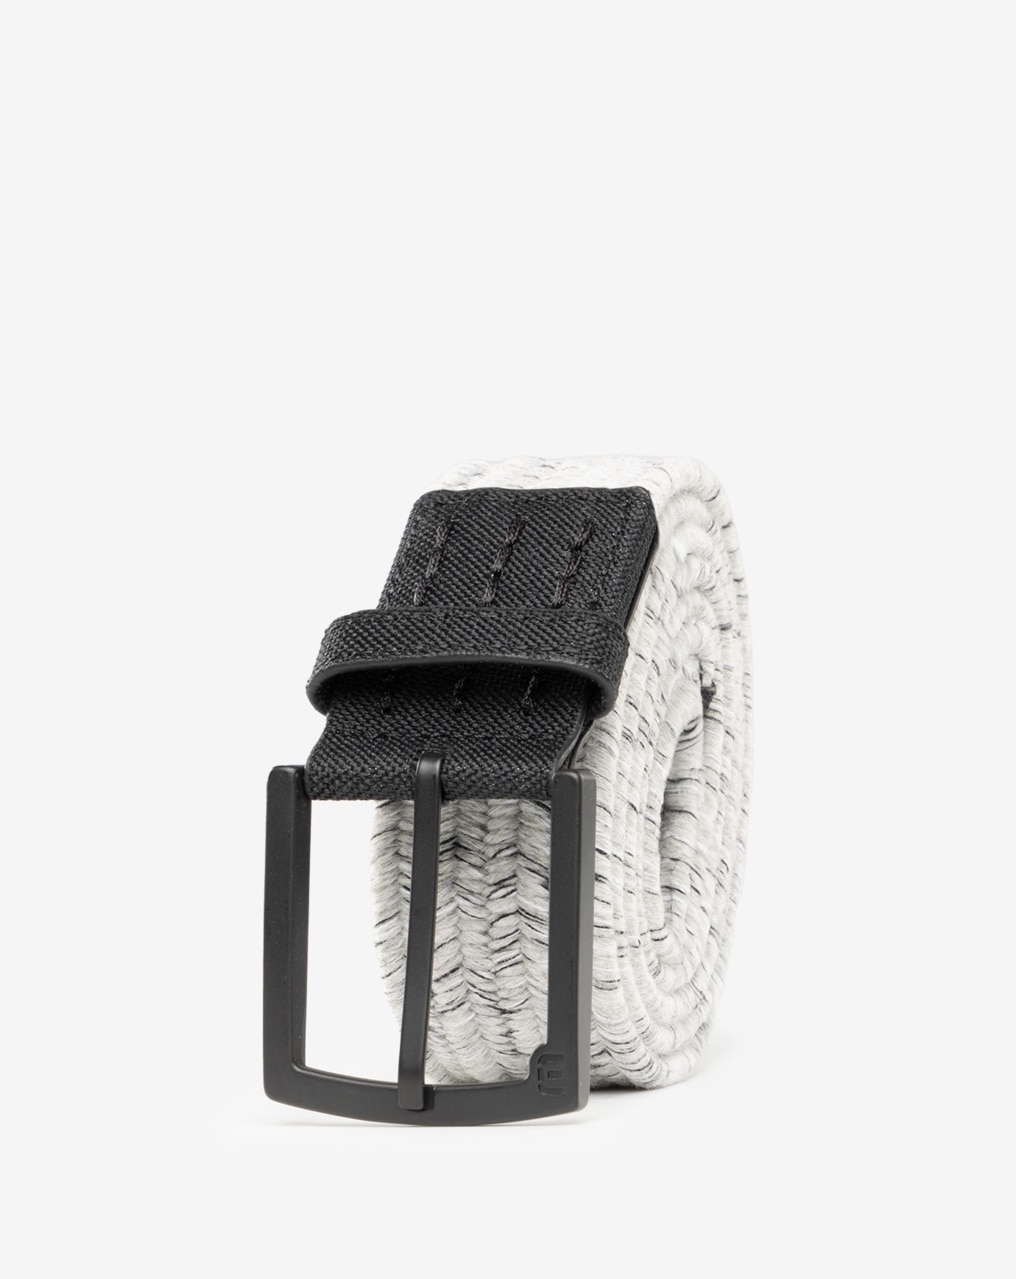 POPSICLE 2.0 STRETCH WOVEN BELT 1